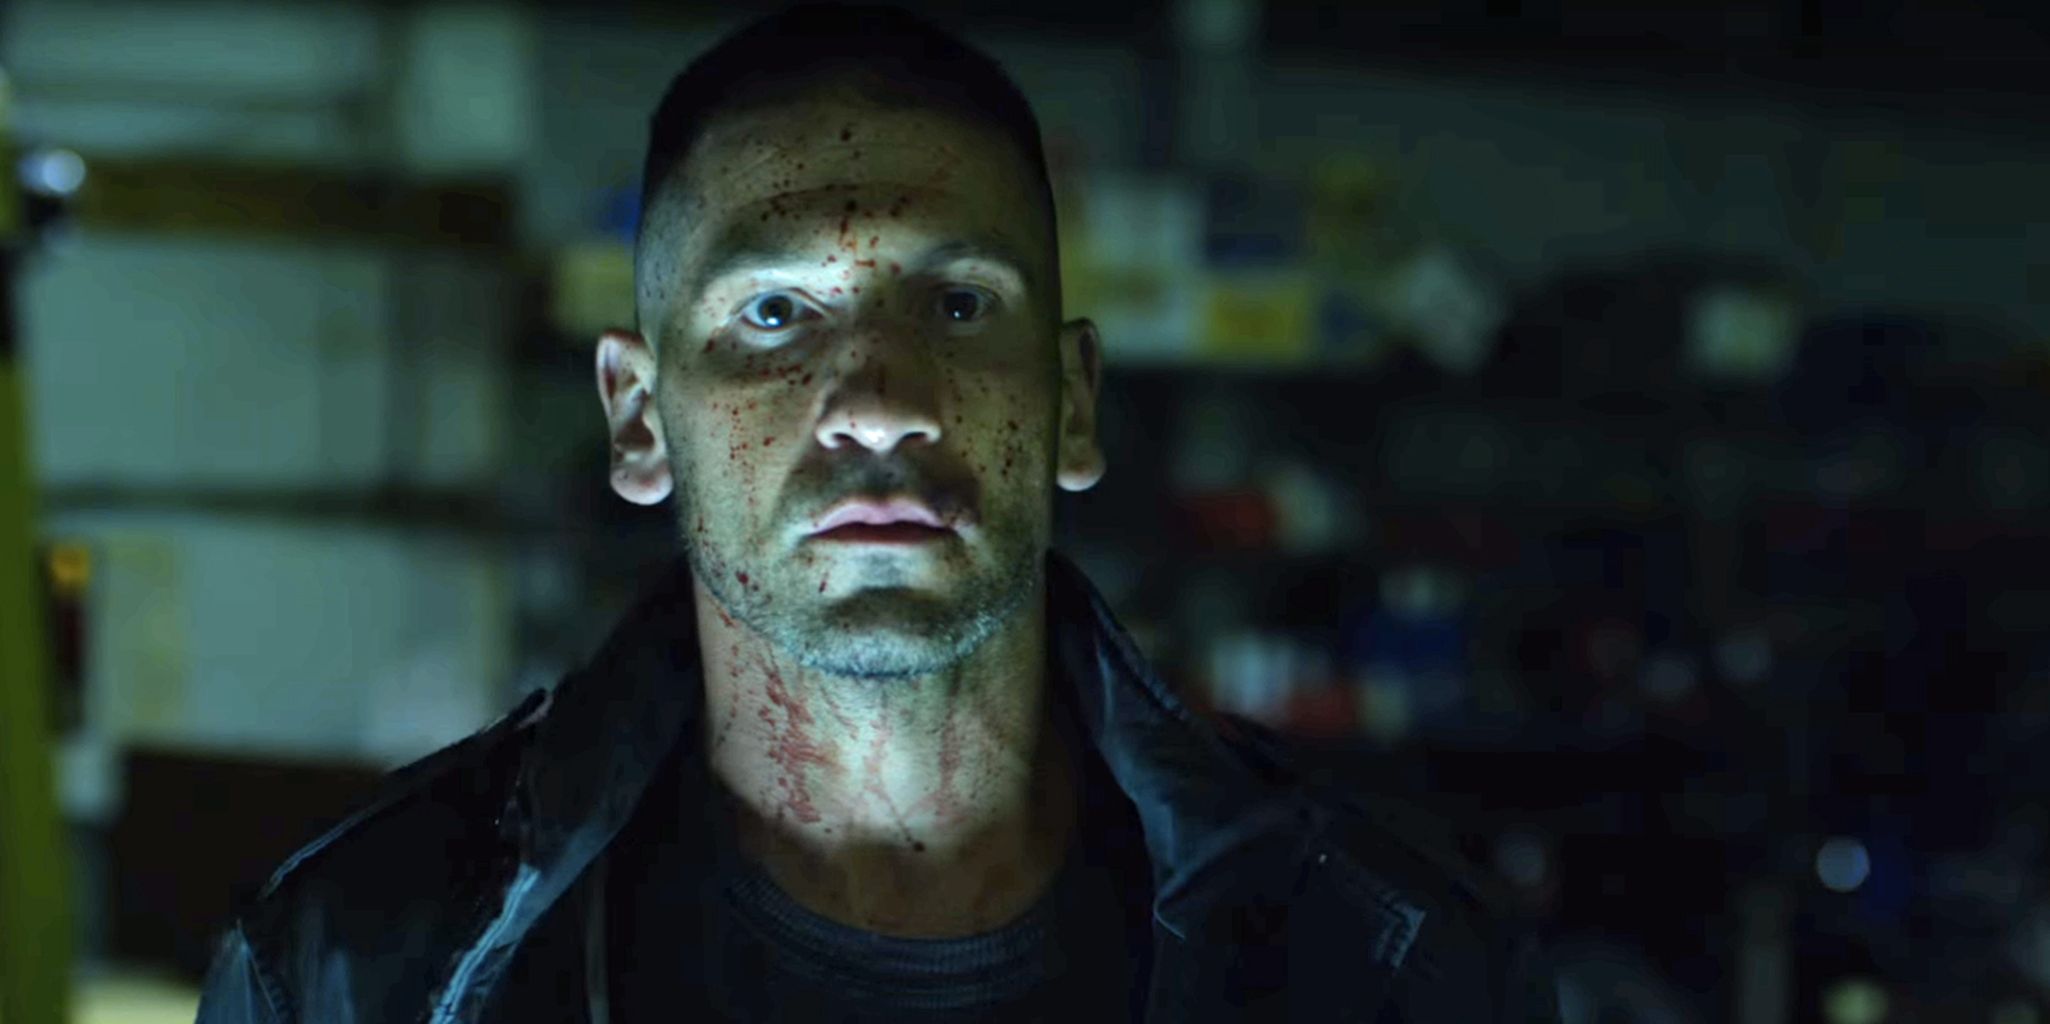 The Punisher is coming in the new trailer for the Netflix Series